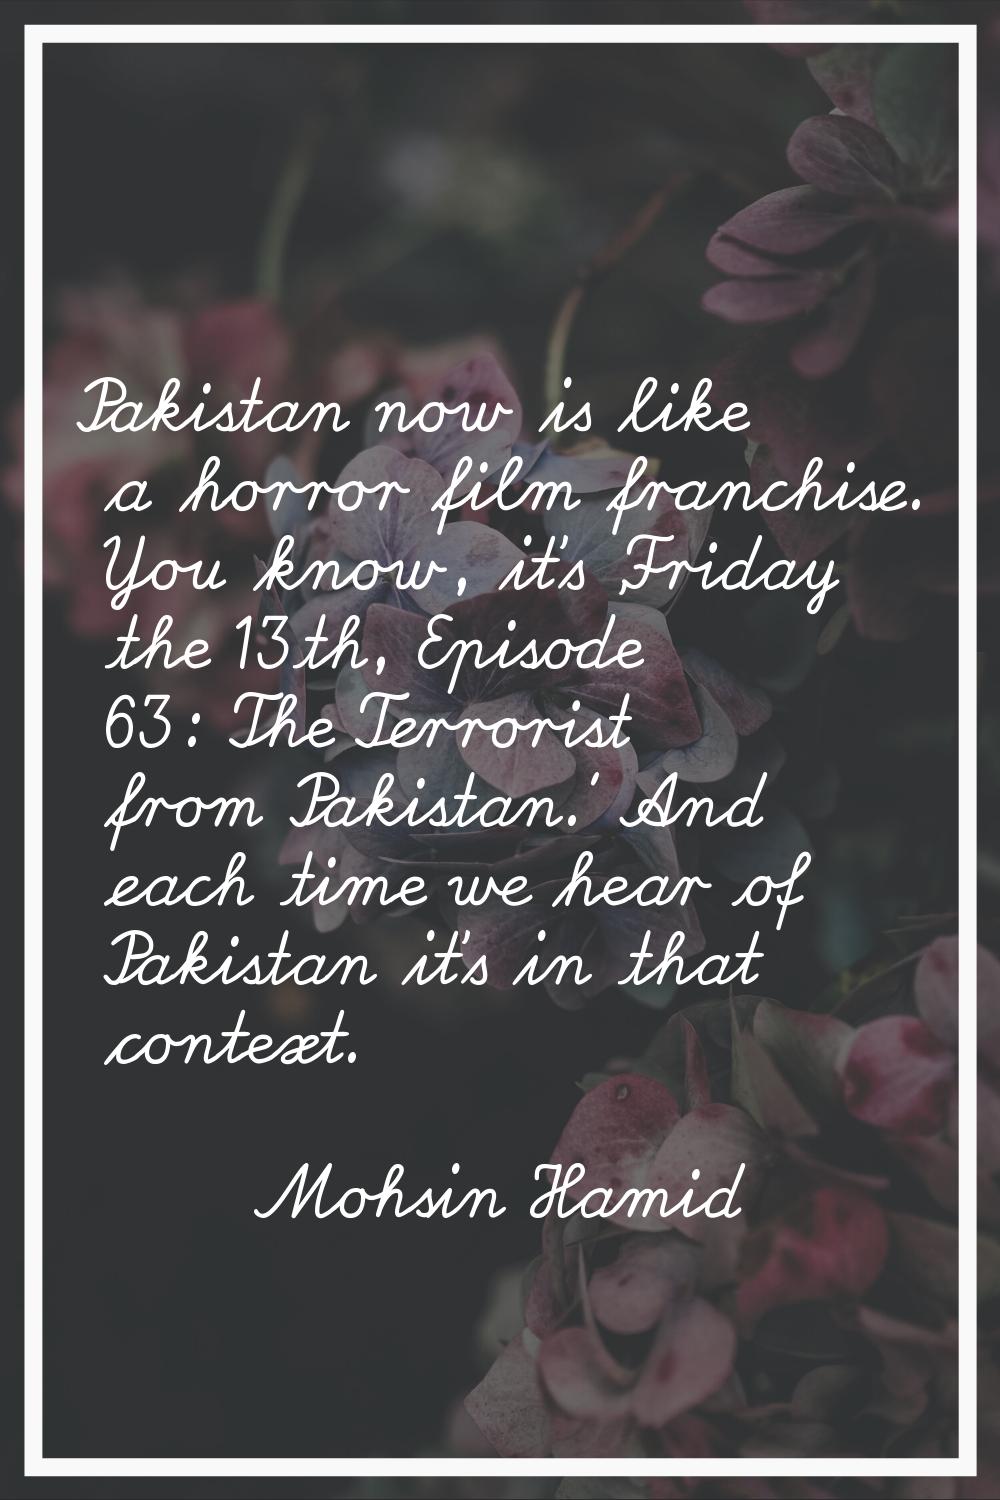 Pakistan now is like a horror film franchise. You know, it's 'Friday the 13th, Episode 63: The Terr